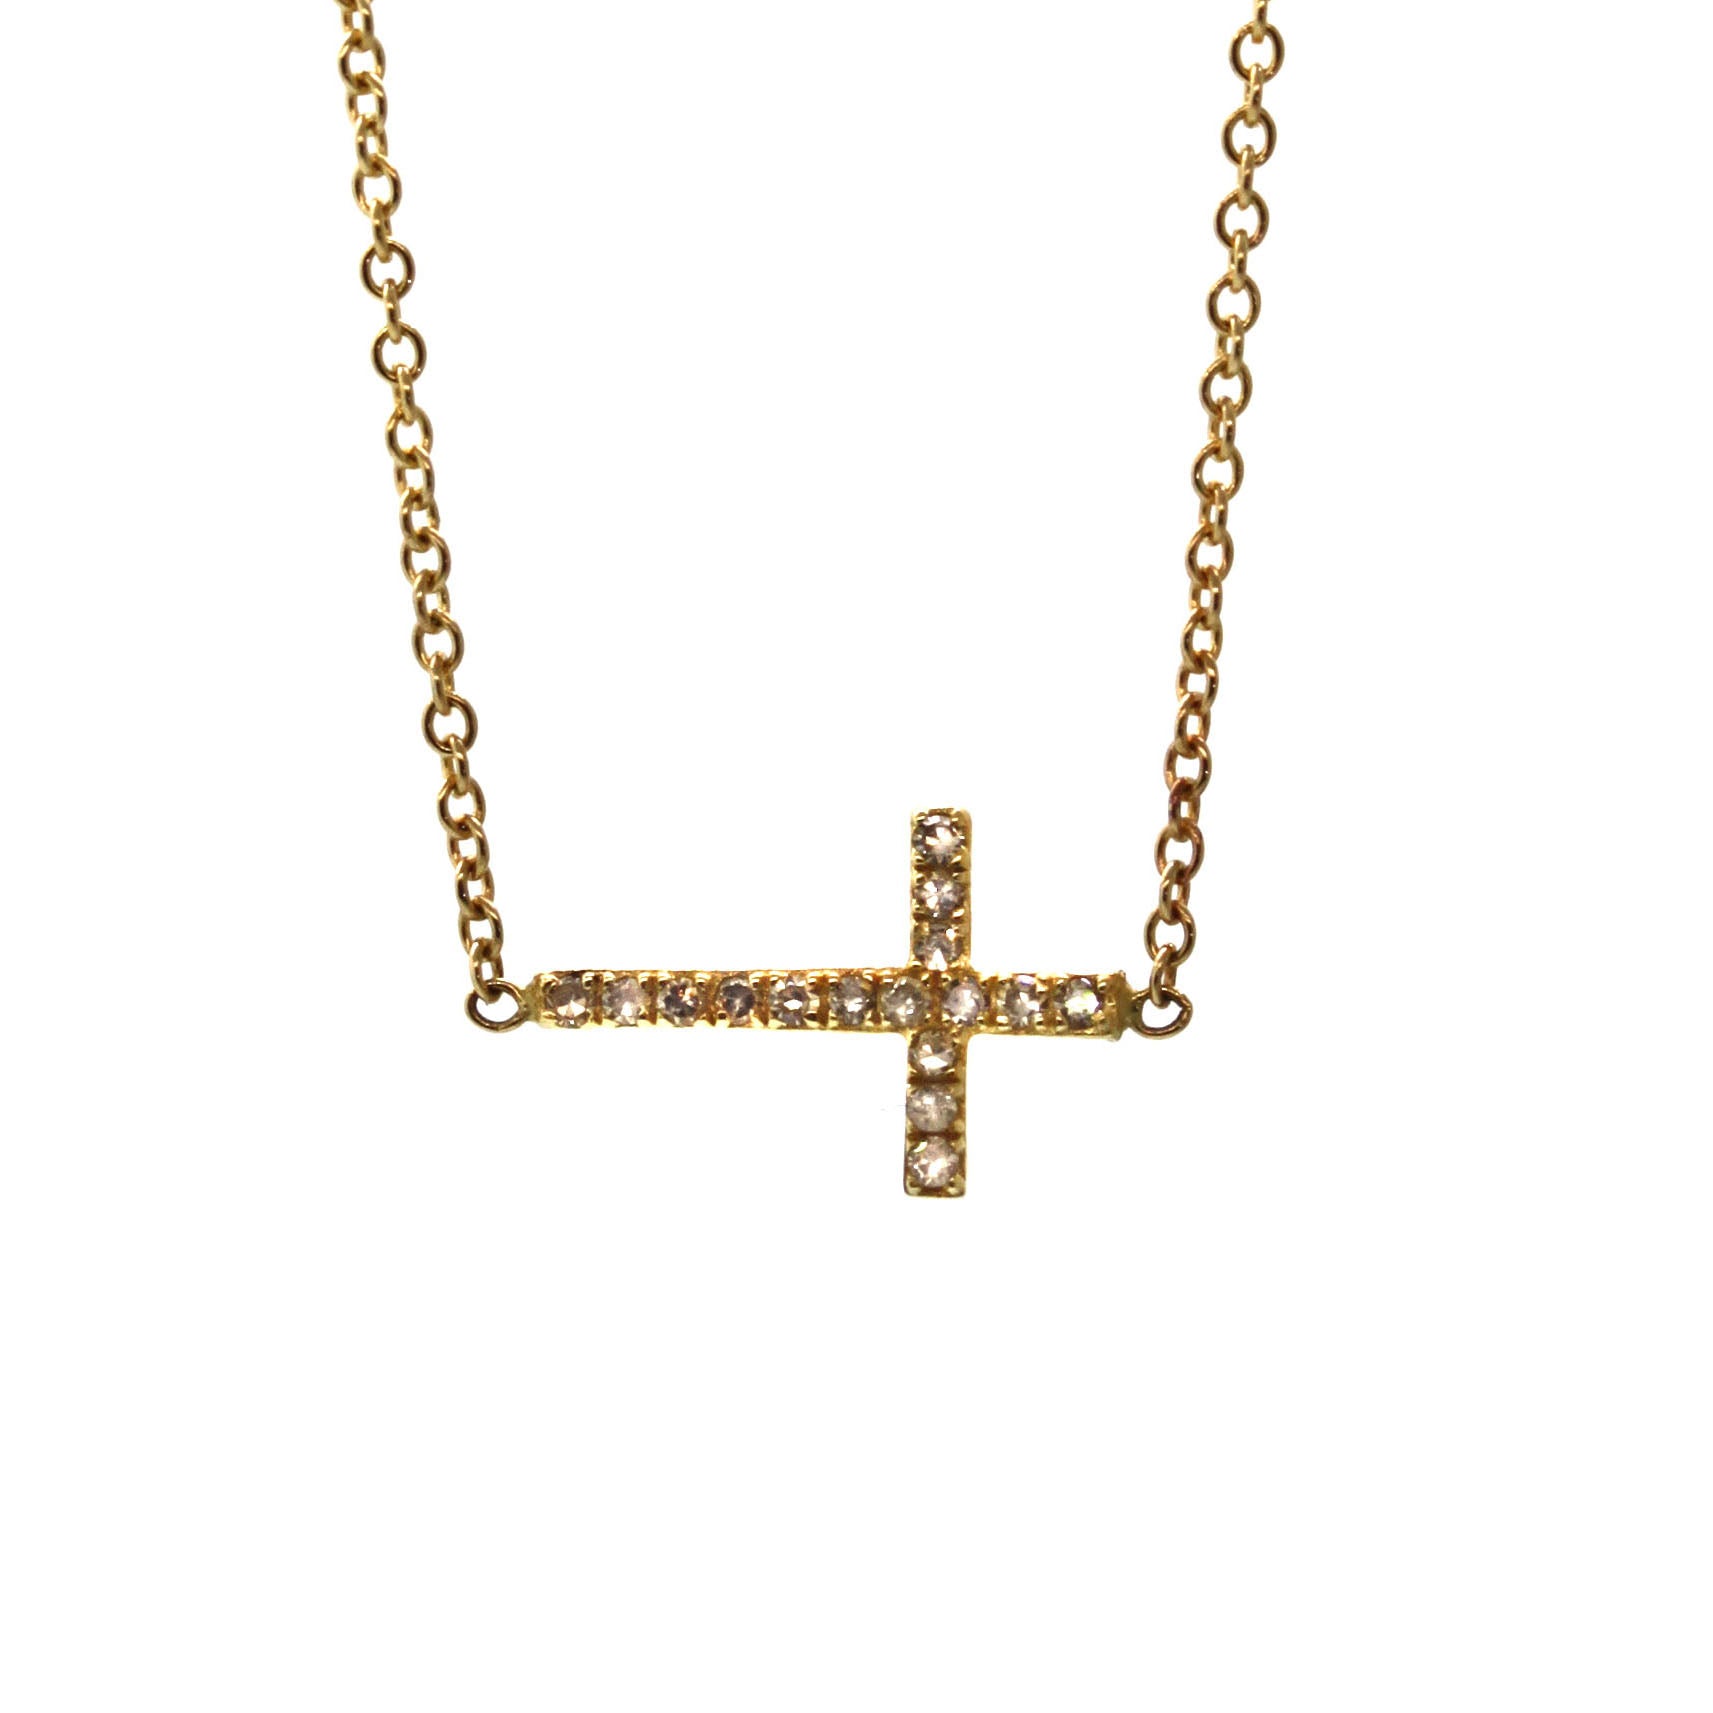 This Everyday Diamond Cross Necklace is just that! Consisting of a yellow gold cross pave set with shimmering champagne diamonds and soldered sideways into the chain, this necklace is simple, versatile, and full of sparkle! It was handcrafted at Rebecca Lankford Designs in Houston, Texas.